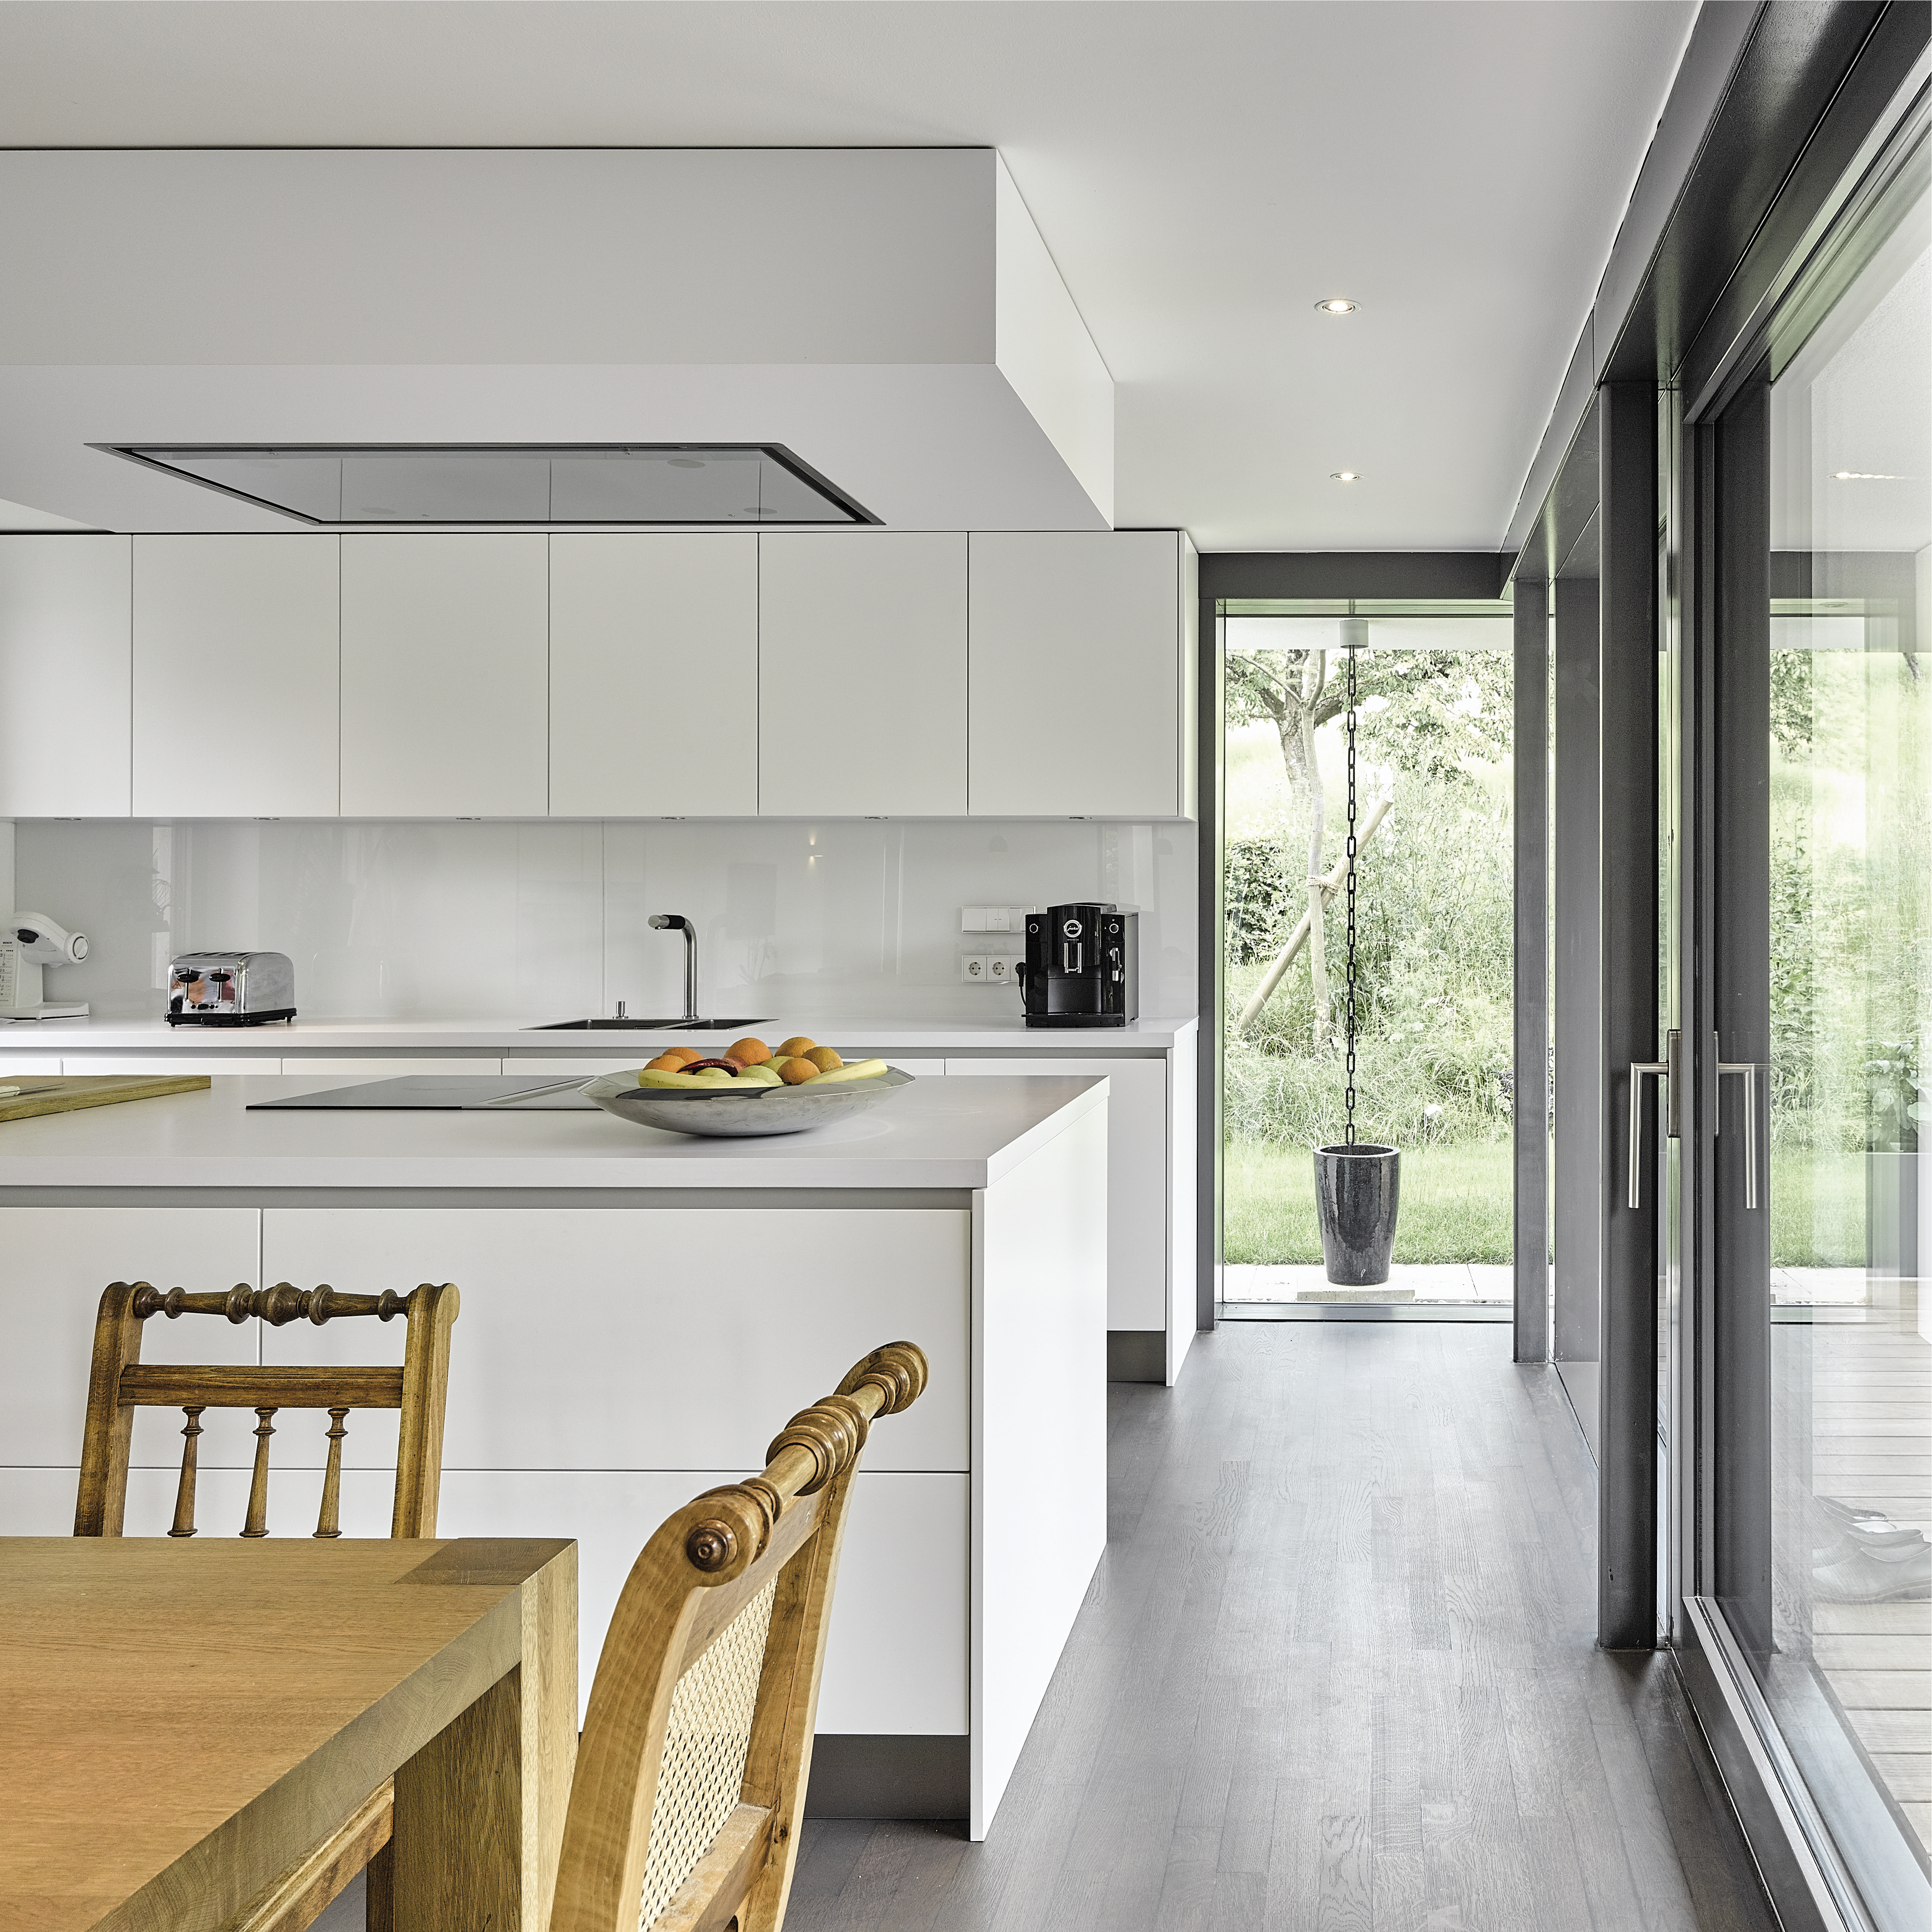 Minimalistic kitchen with a large window